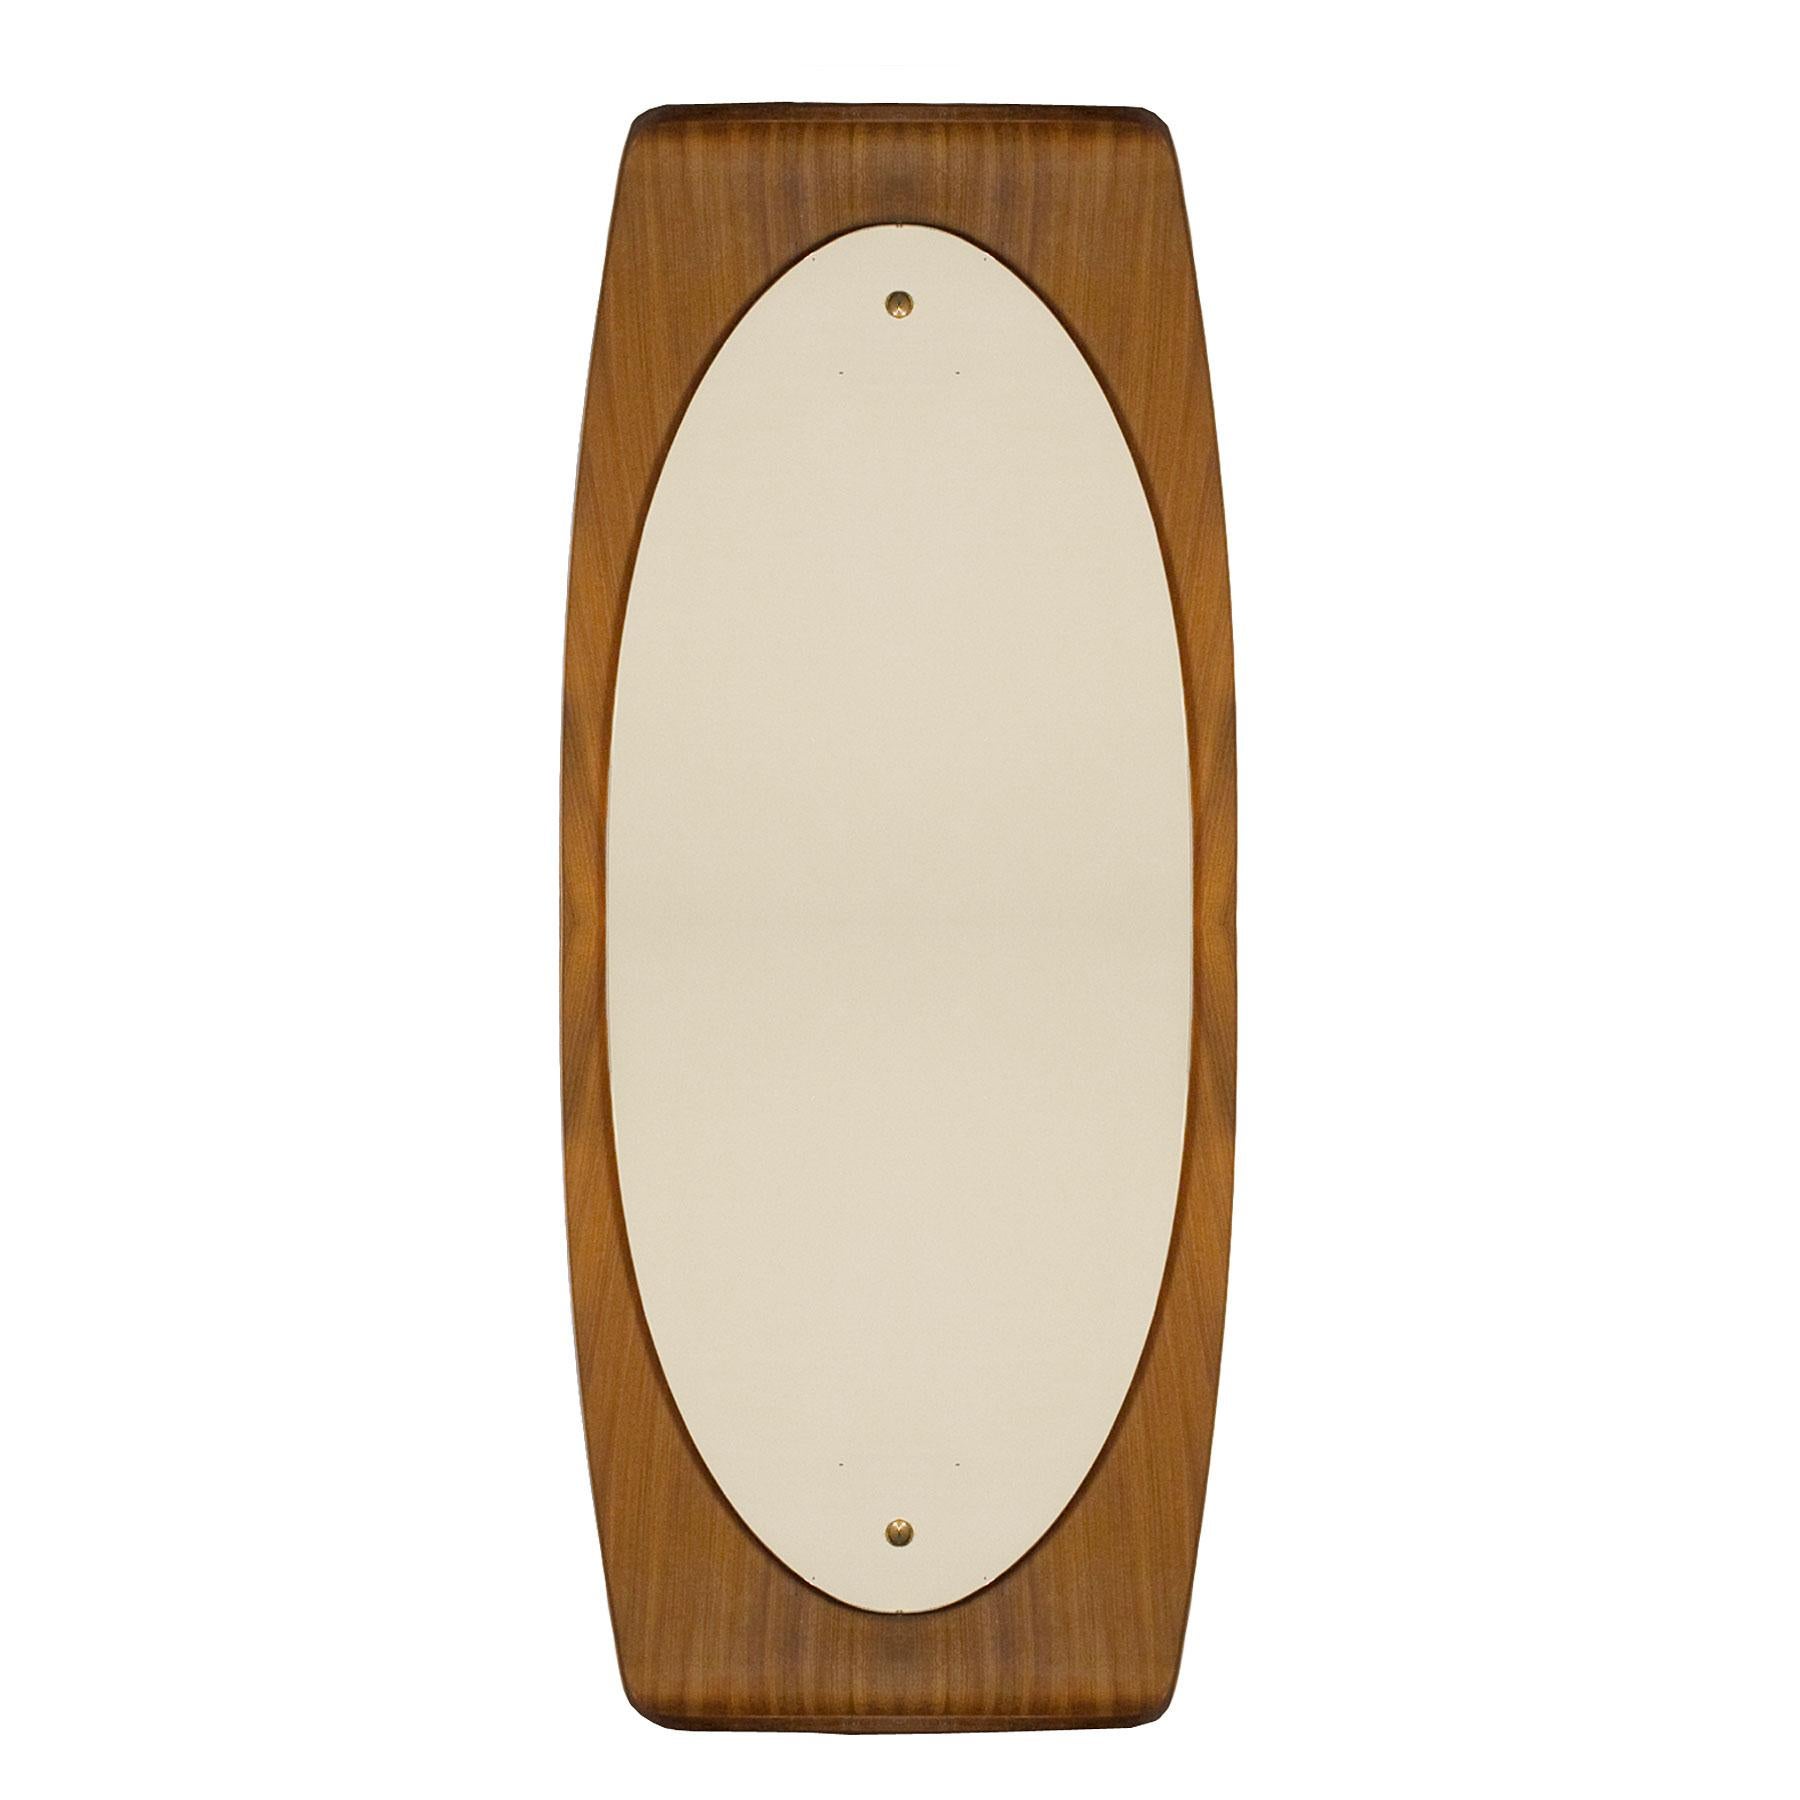 Italian Large Mid-Century Modern Curved Mirror by Campo & Graffi, Teak, Brass - Italy For Sale